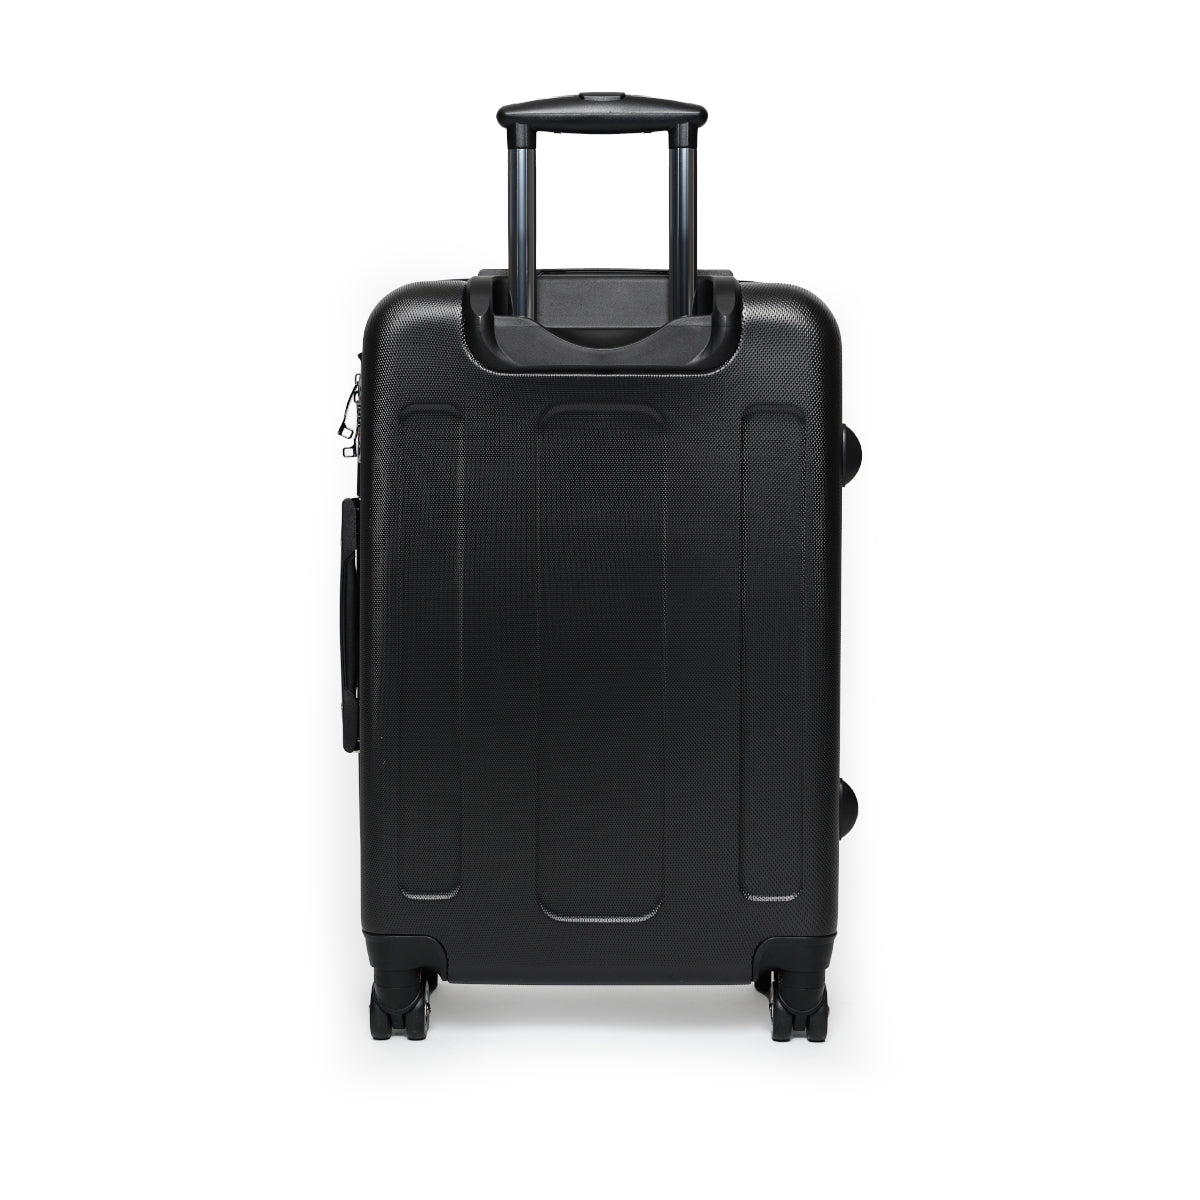 Getrott Hole Live Through This 1994 Black Cabin Suitcase Inner Pockets Extended Storage Adjustable Telescopic Handle Inner Pockets Double wheeled Polycarbonate Hard-shell Built-in Lock